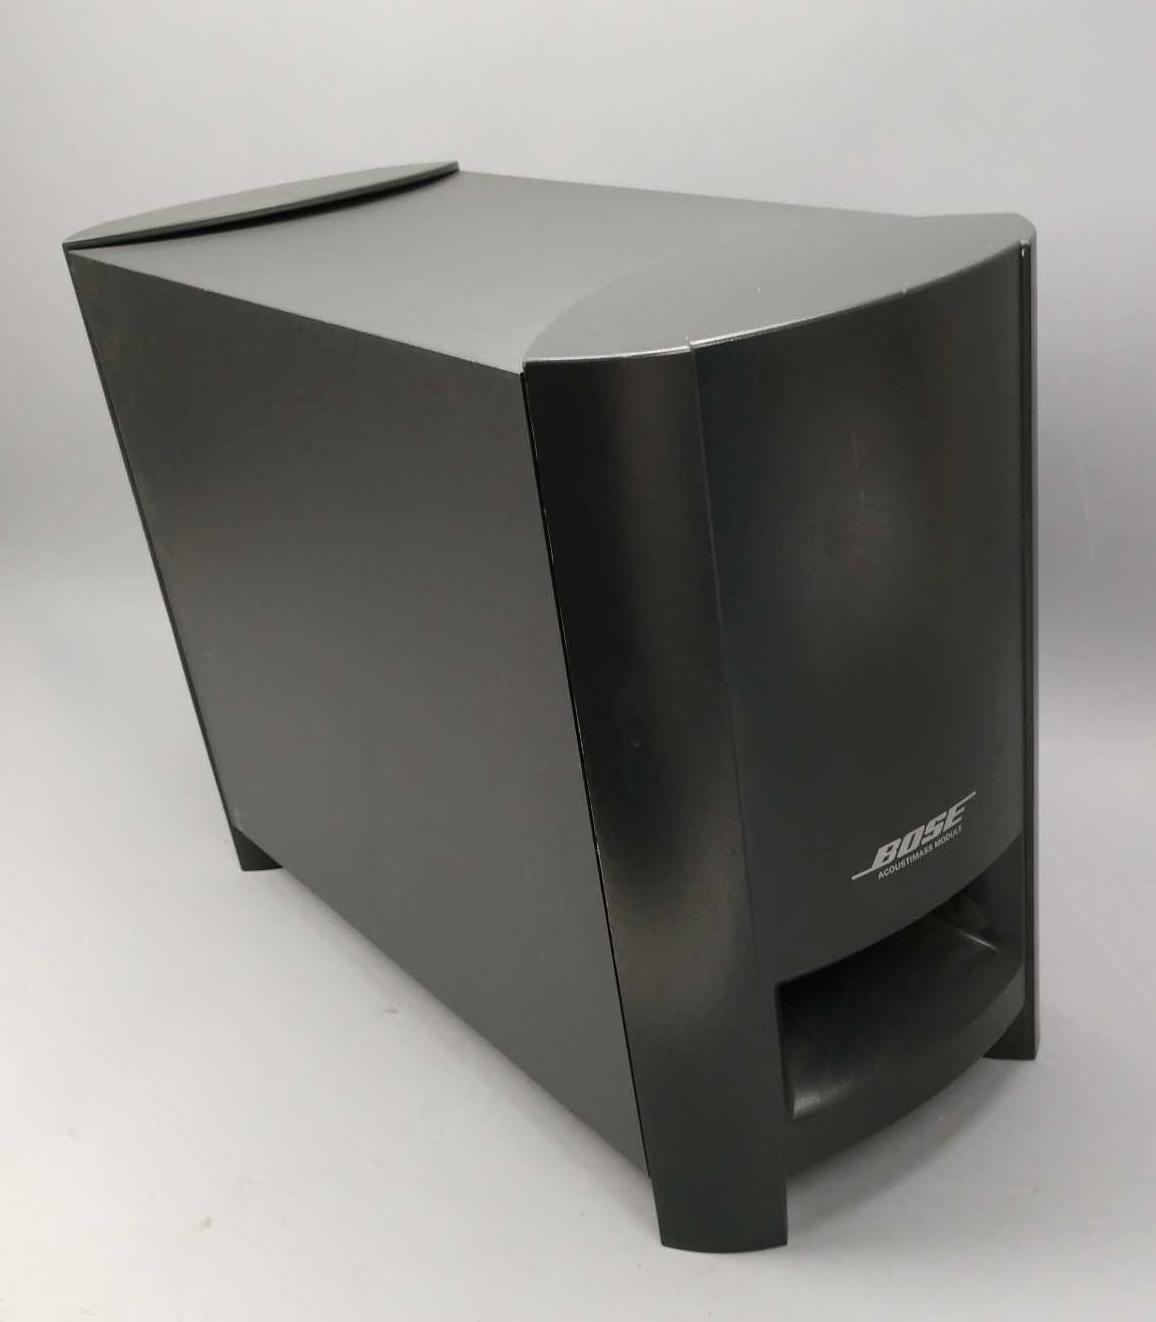 Bose acoustimass Home Theater subwoofer speaker